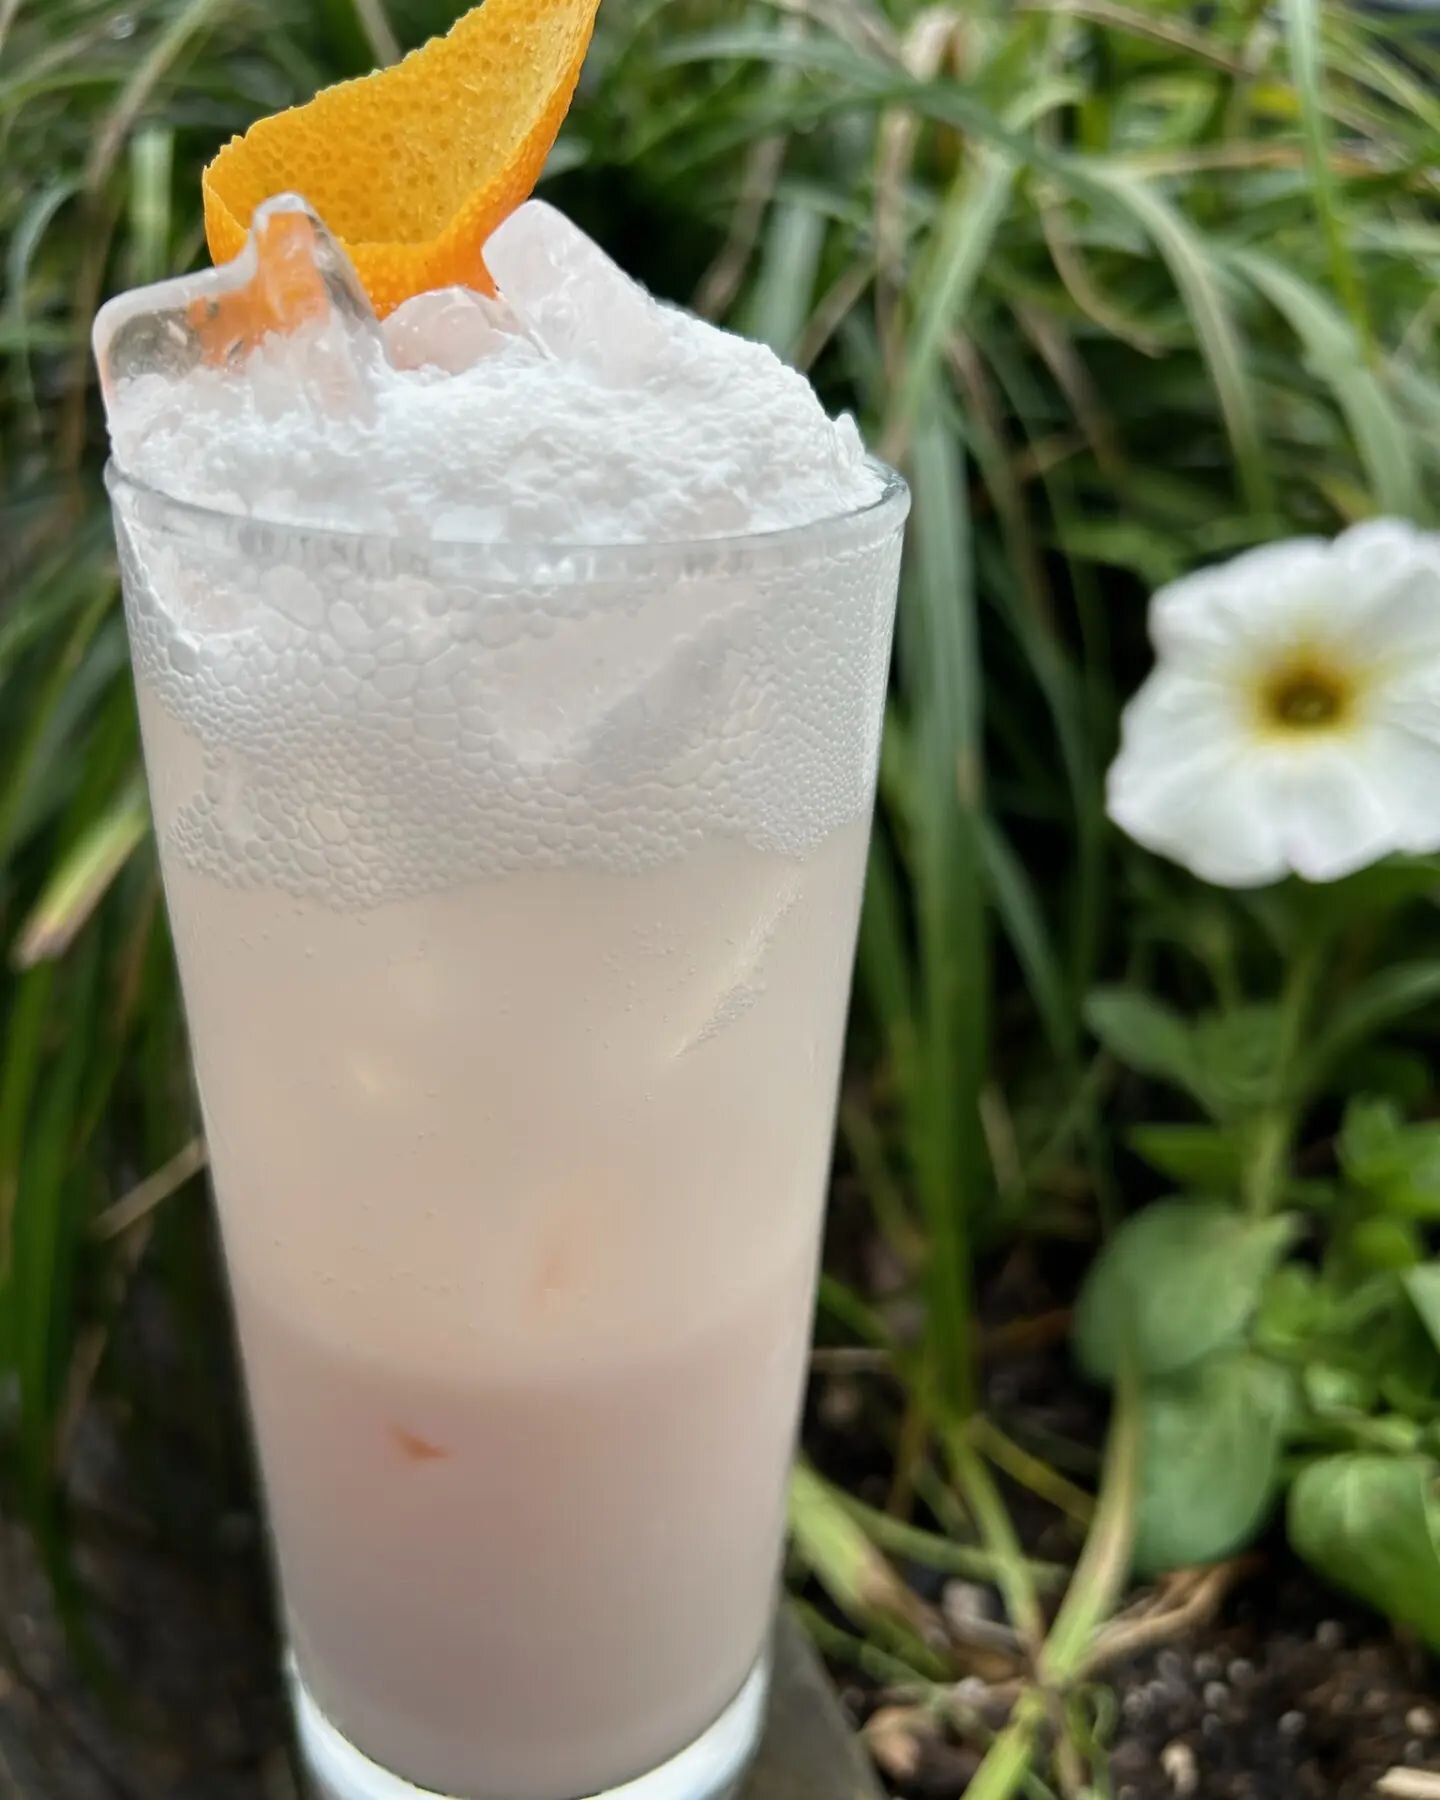 Not imbibing? No worries, we have you covered! This is the newest in our NA lineup!

Love Is Blind-
@seedlipdrinks Grove, Rhubarb-Strawberry Shrub, Coconut Milk,  Lemon, Orange Bitters, Soda Water

#alcoholfree #notimbibing #springdrinks #nalifestyle